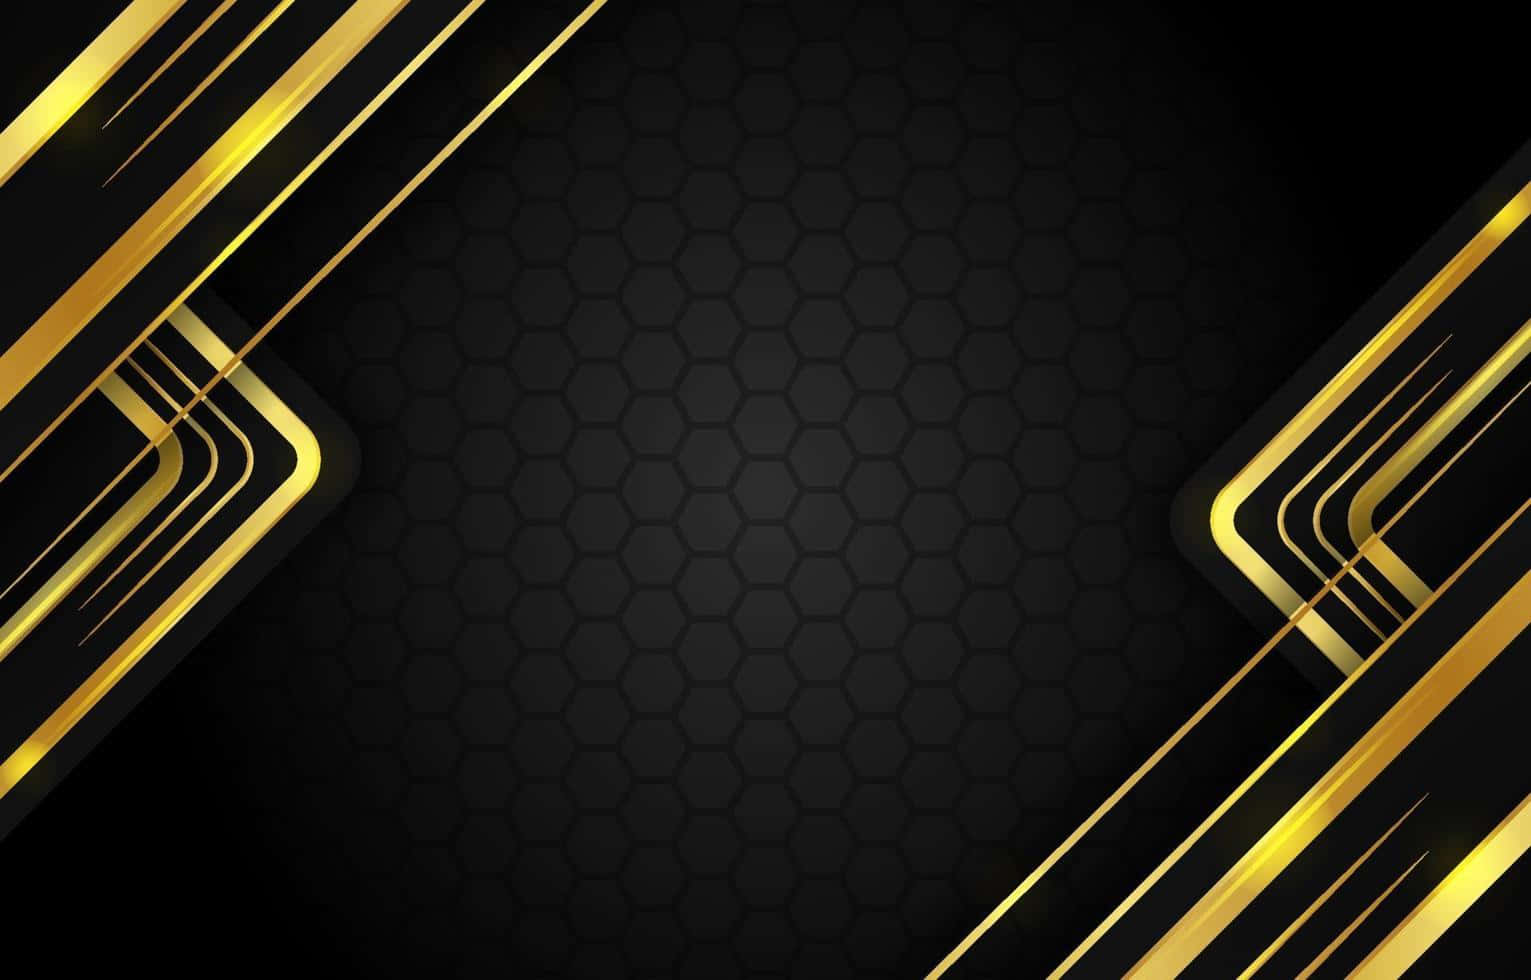 Gold And Black Background With Geometric Lines